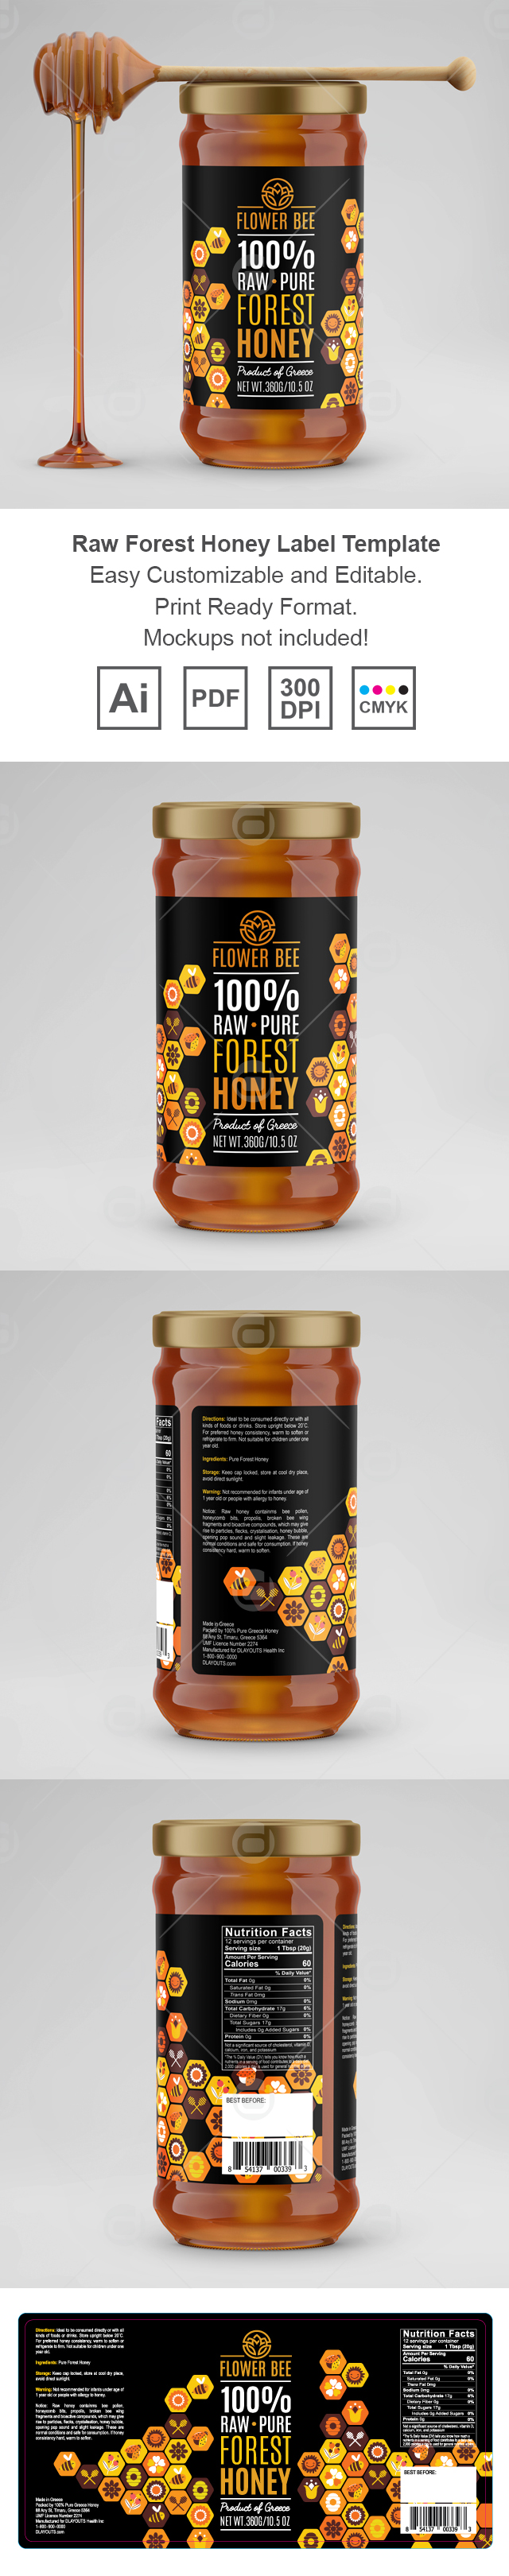 Pure Forest Honey Labels Template